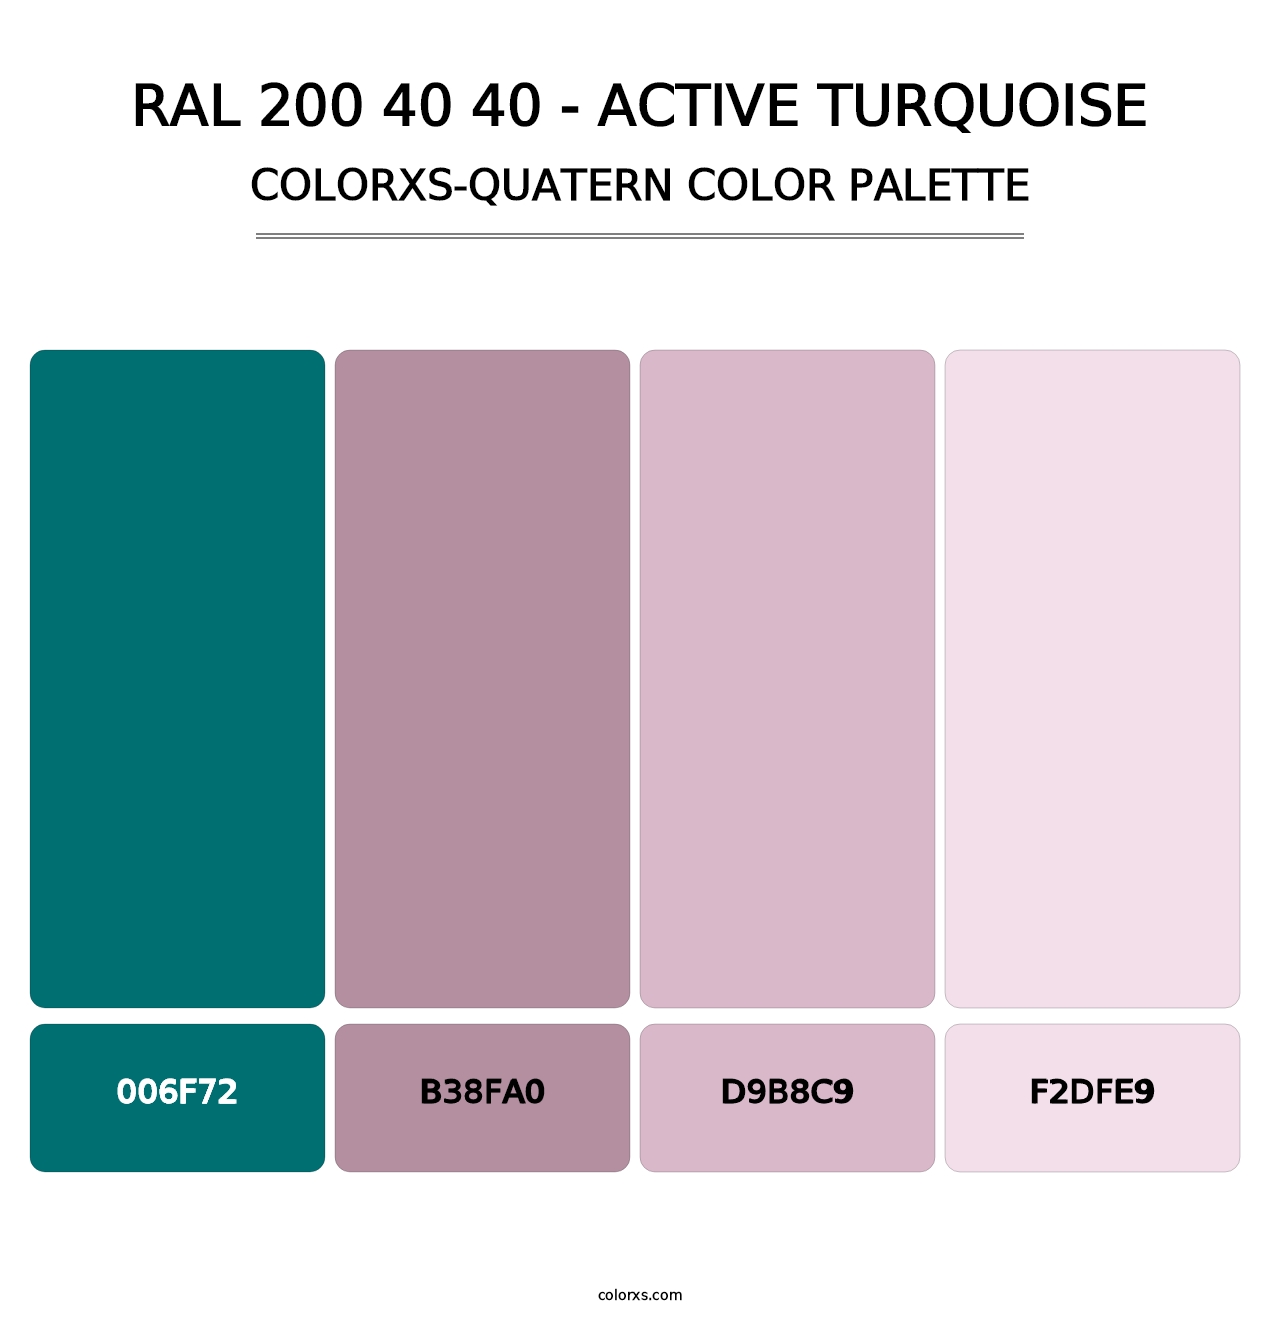 RAL 200 40 40 - Active Turquoise - Colorxs Quatern Palette